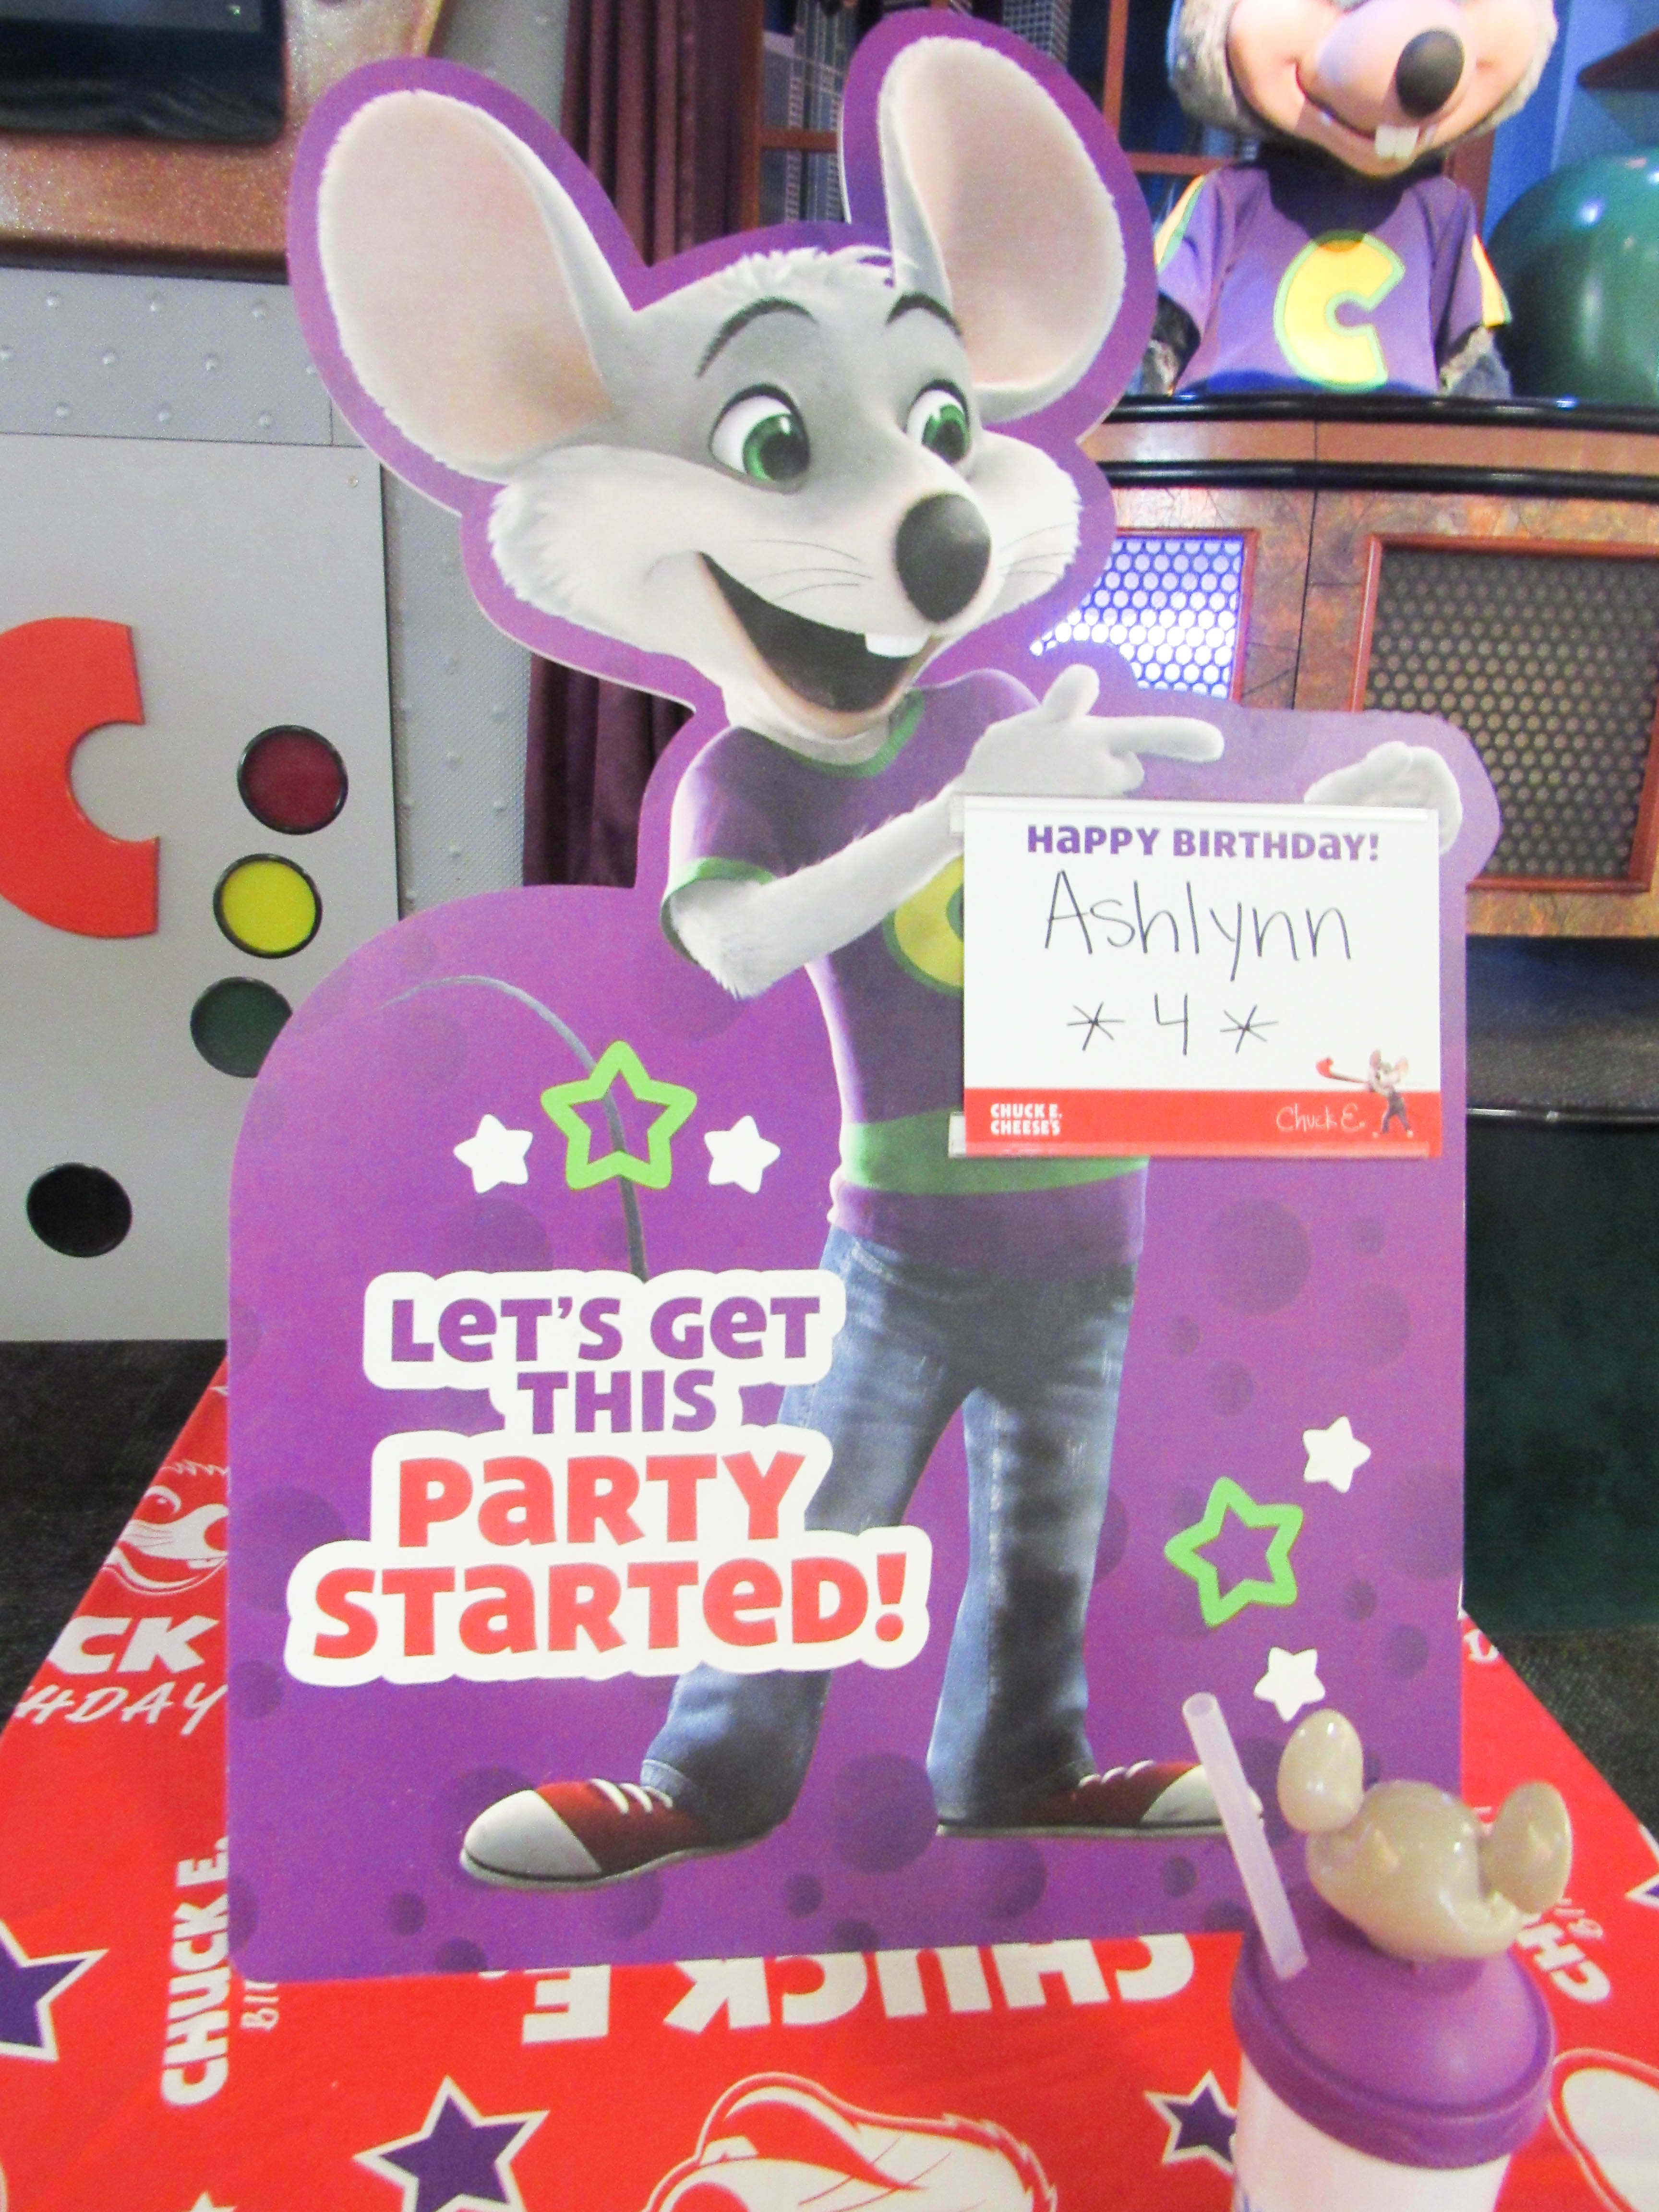 Chuck e cheese birthday party on livin' life with style 